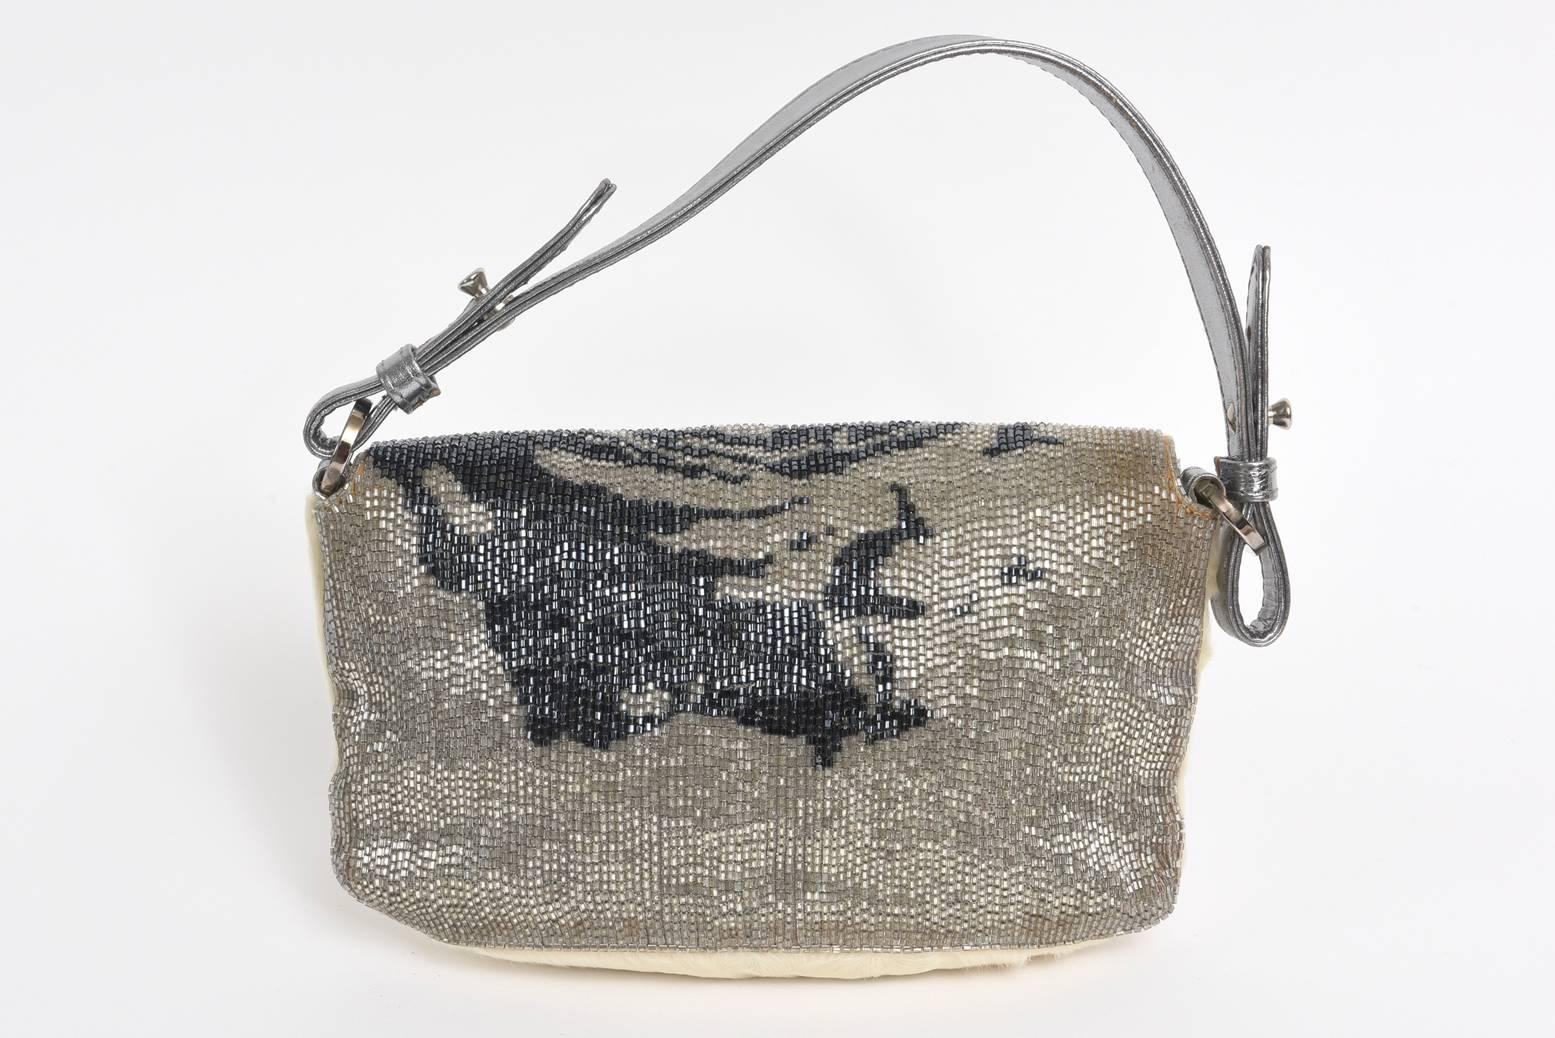 This stunning and rarely used runway limited edition Italian Valentino handbag /clutch /shoulder bag is made of the rich components of silver napa leather, white rabbit fur and Swarovski crystal beading in a grey/black and blue design. It has a